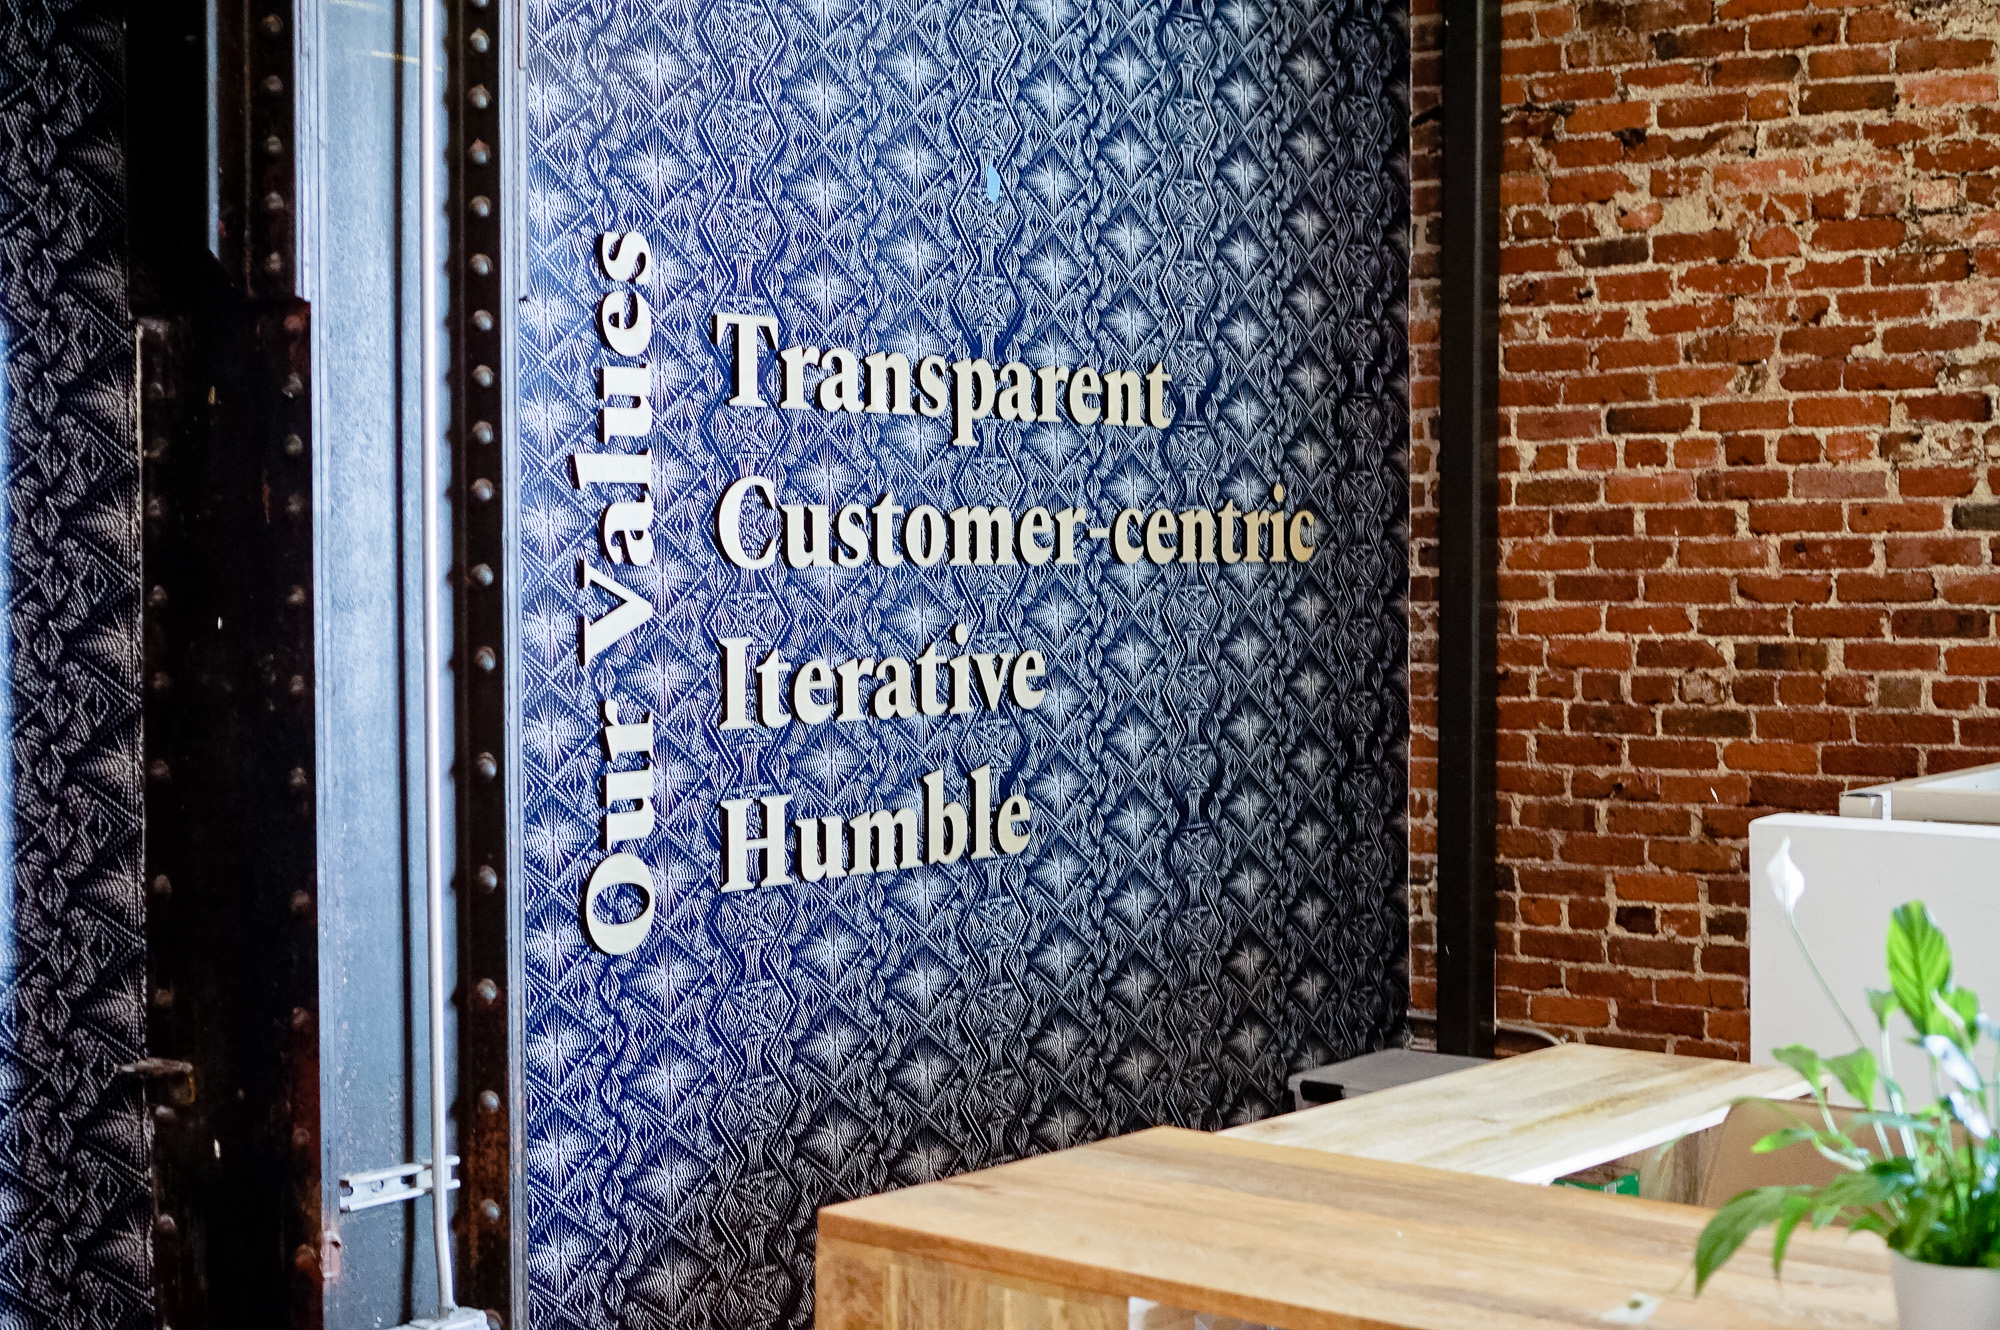 Light wood letters on blue geometric patterned wallpaper for the lobby of Zeus, a San Francisco based company providing beautiful, fully furnished homes for business travelers staying one month or longer.